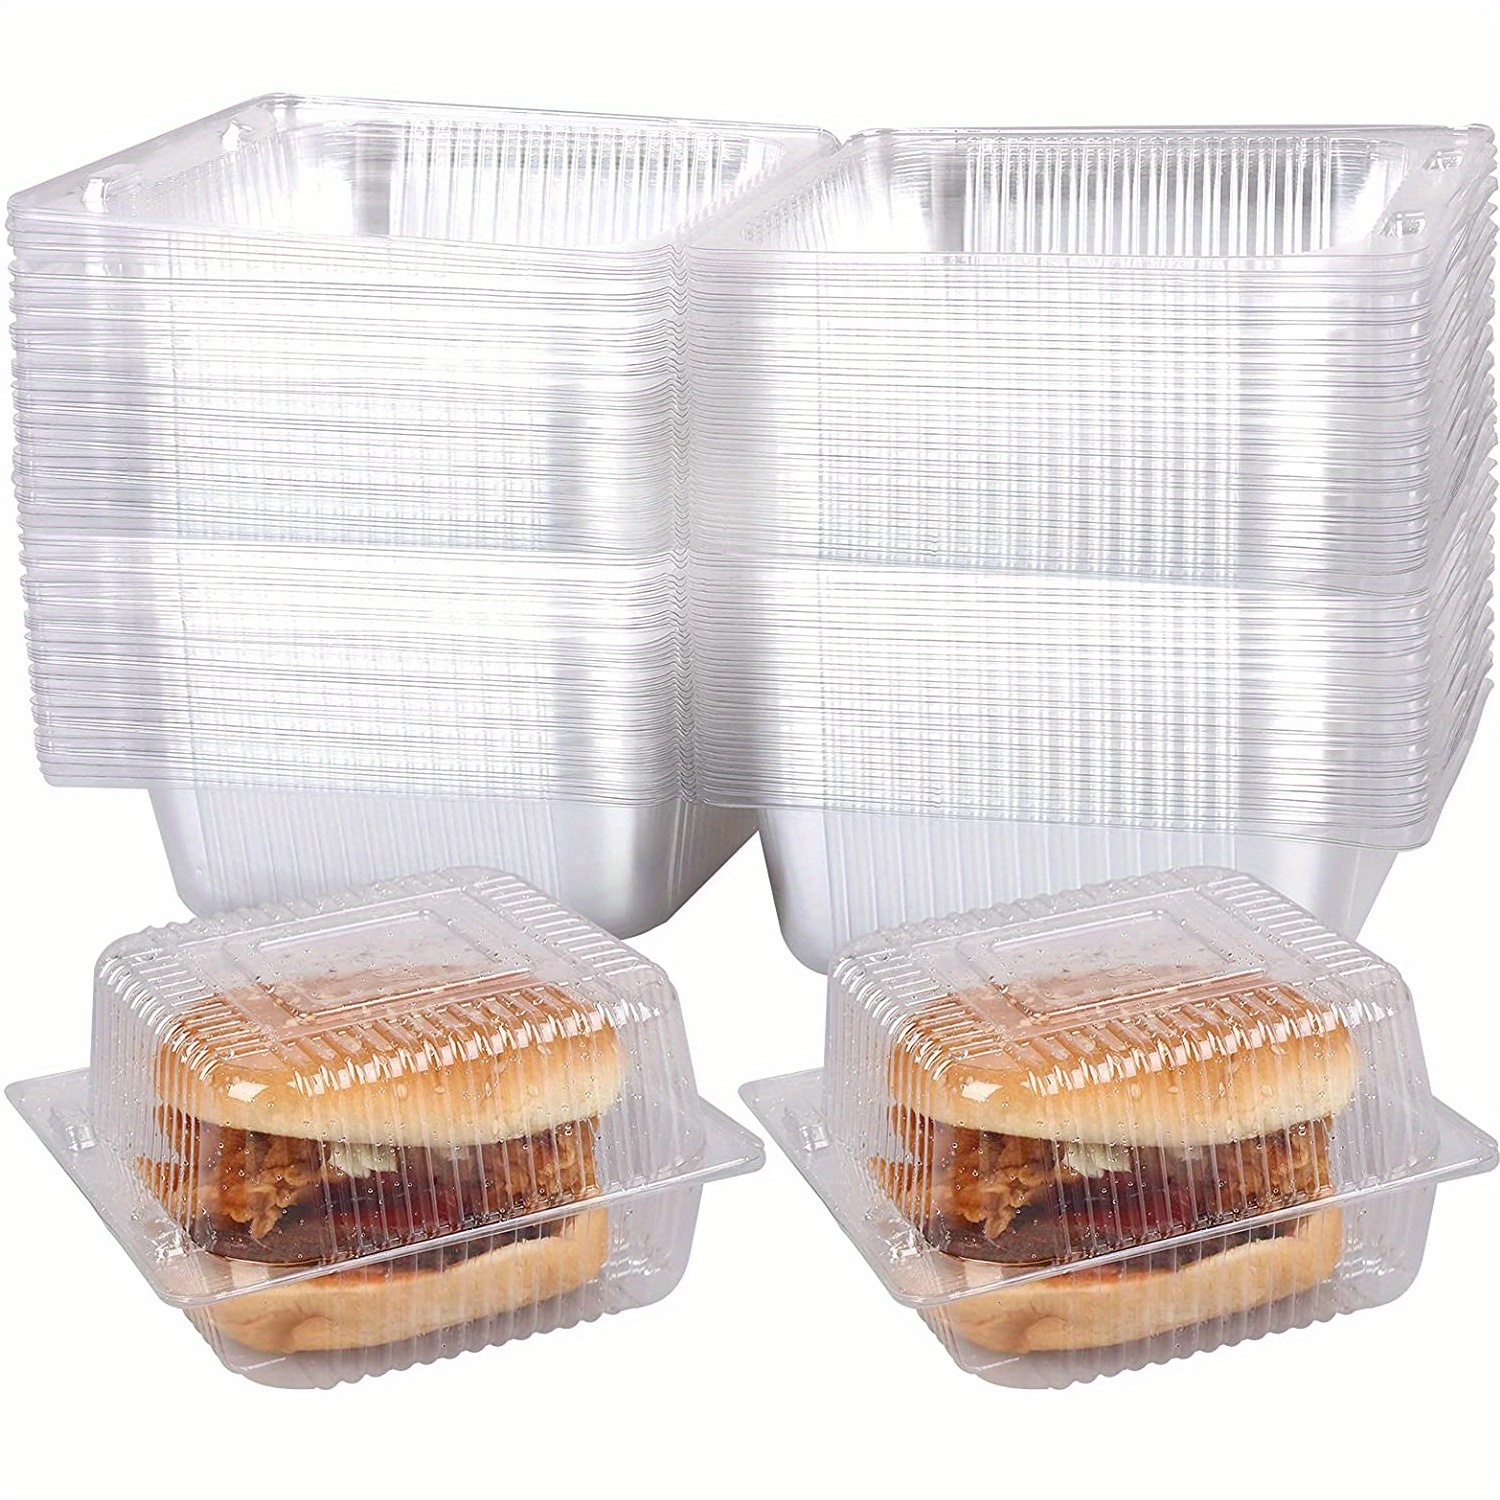 YR9581 America Hot Sale Disposable Take Out Clamshell Food Container  Microwavable Hinged Lunch Box Manufacturers, Suppliers and Factory -  Wholesale Products - Huizhou Yangrui Printing & Packaging Co.,Ltd.